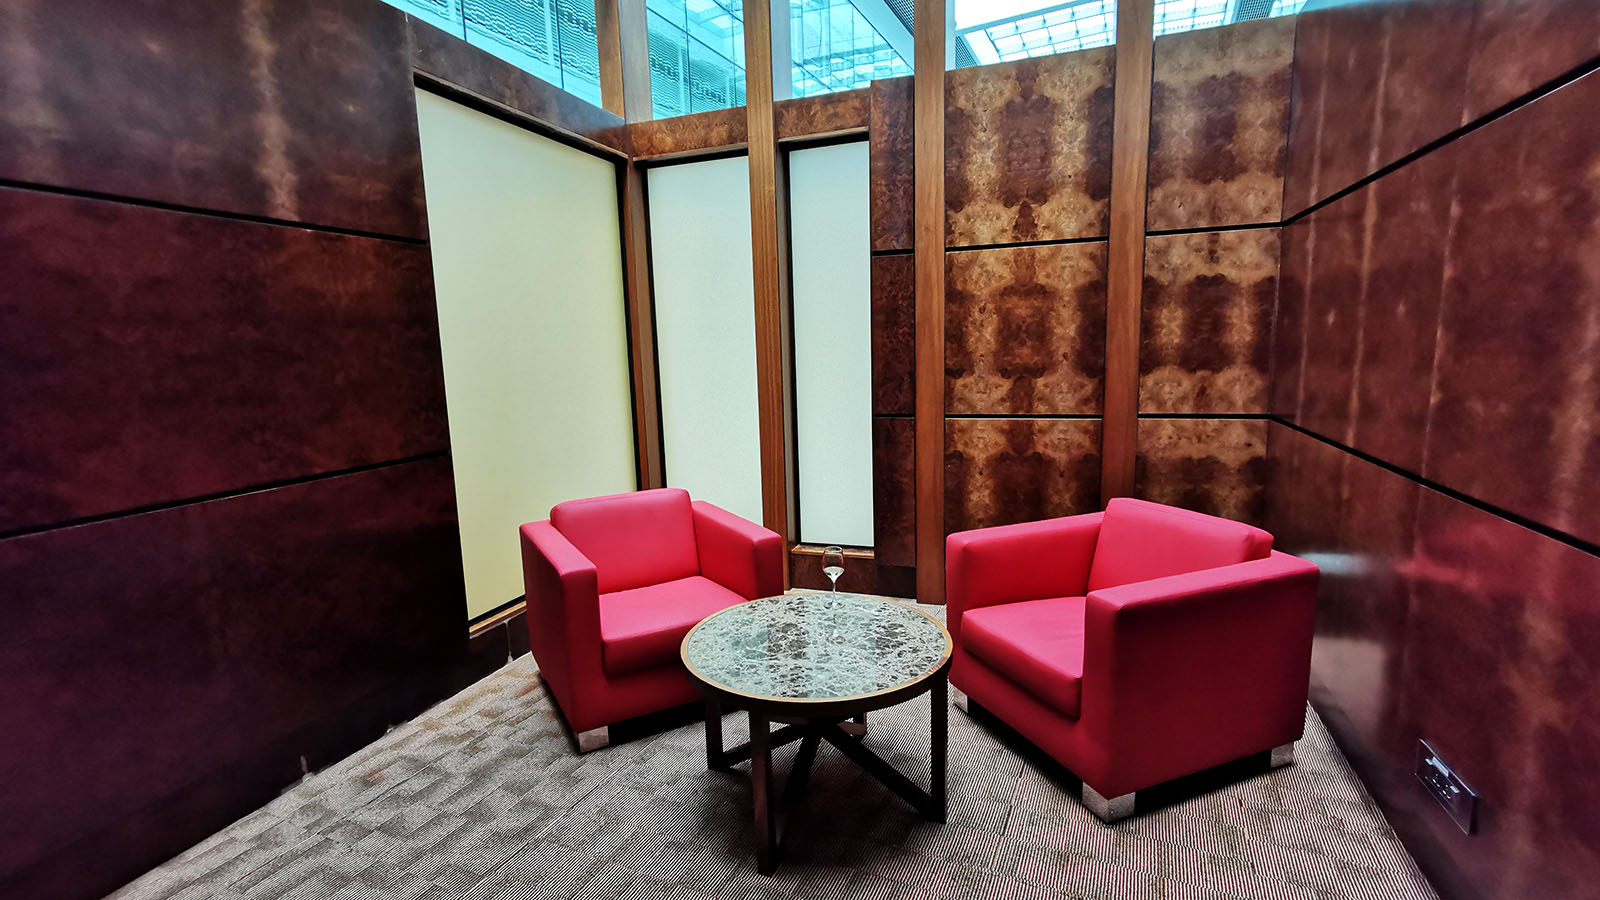 Secluded area in the Emirates Business Class Lounge, Dubai Concourse A